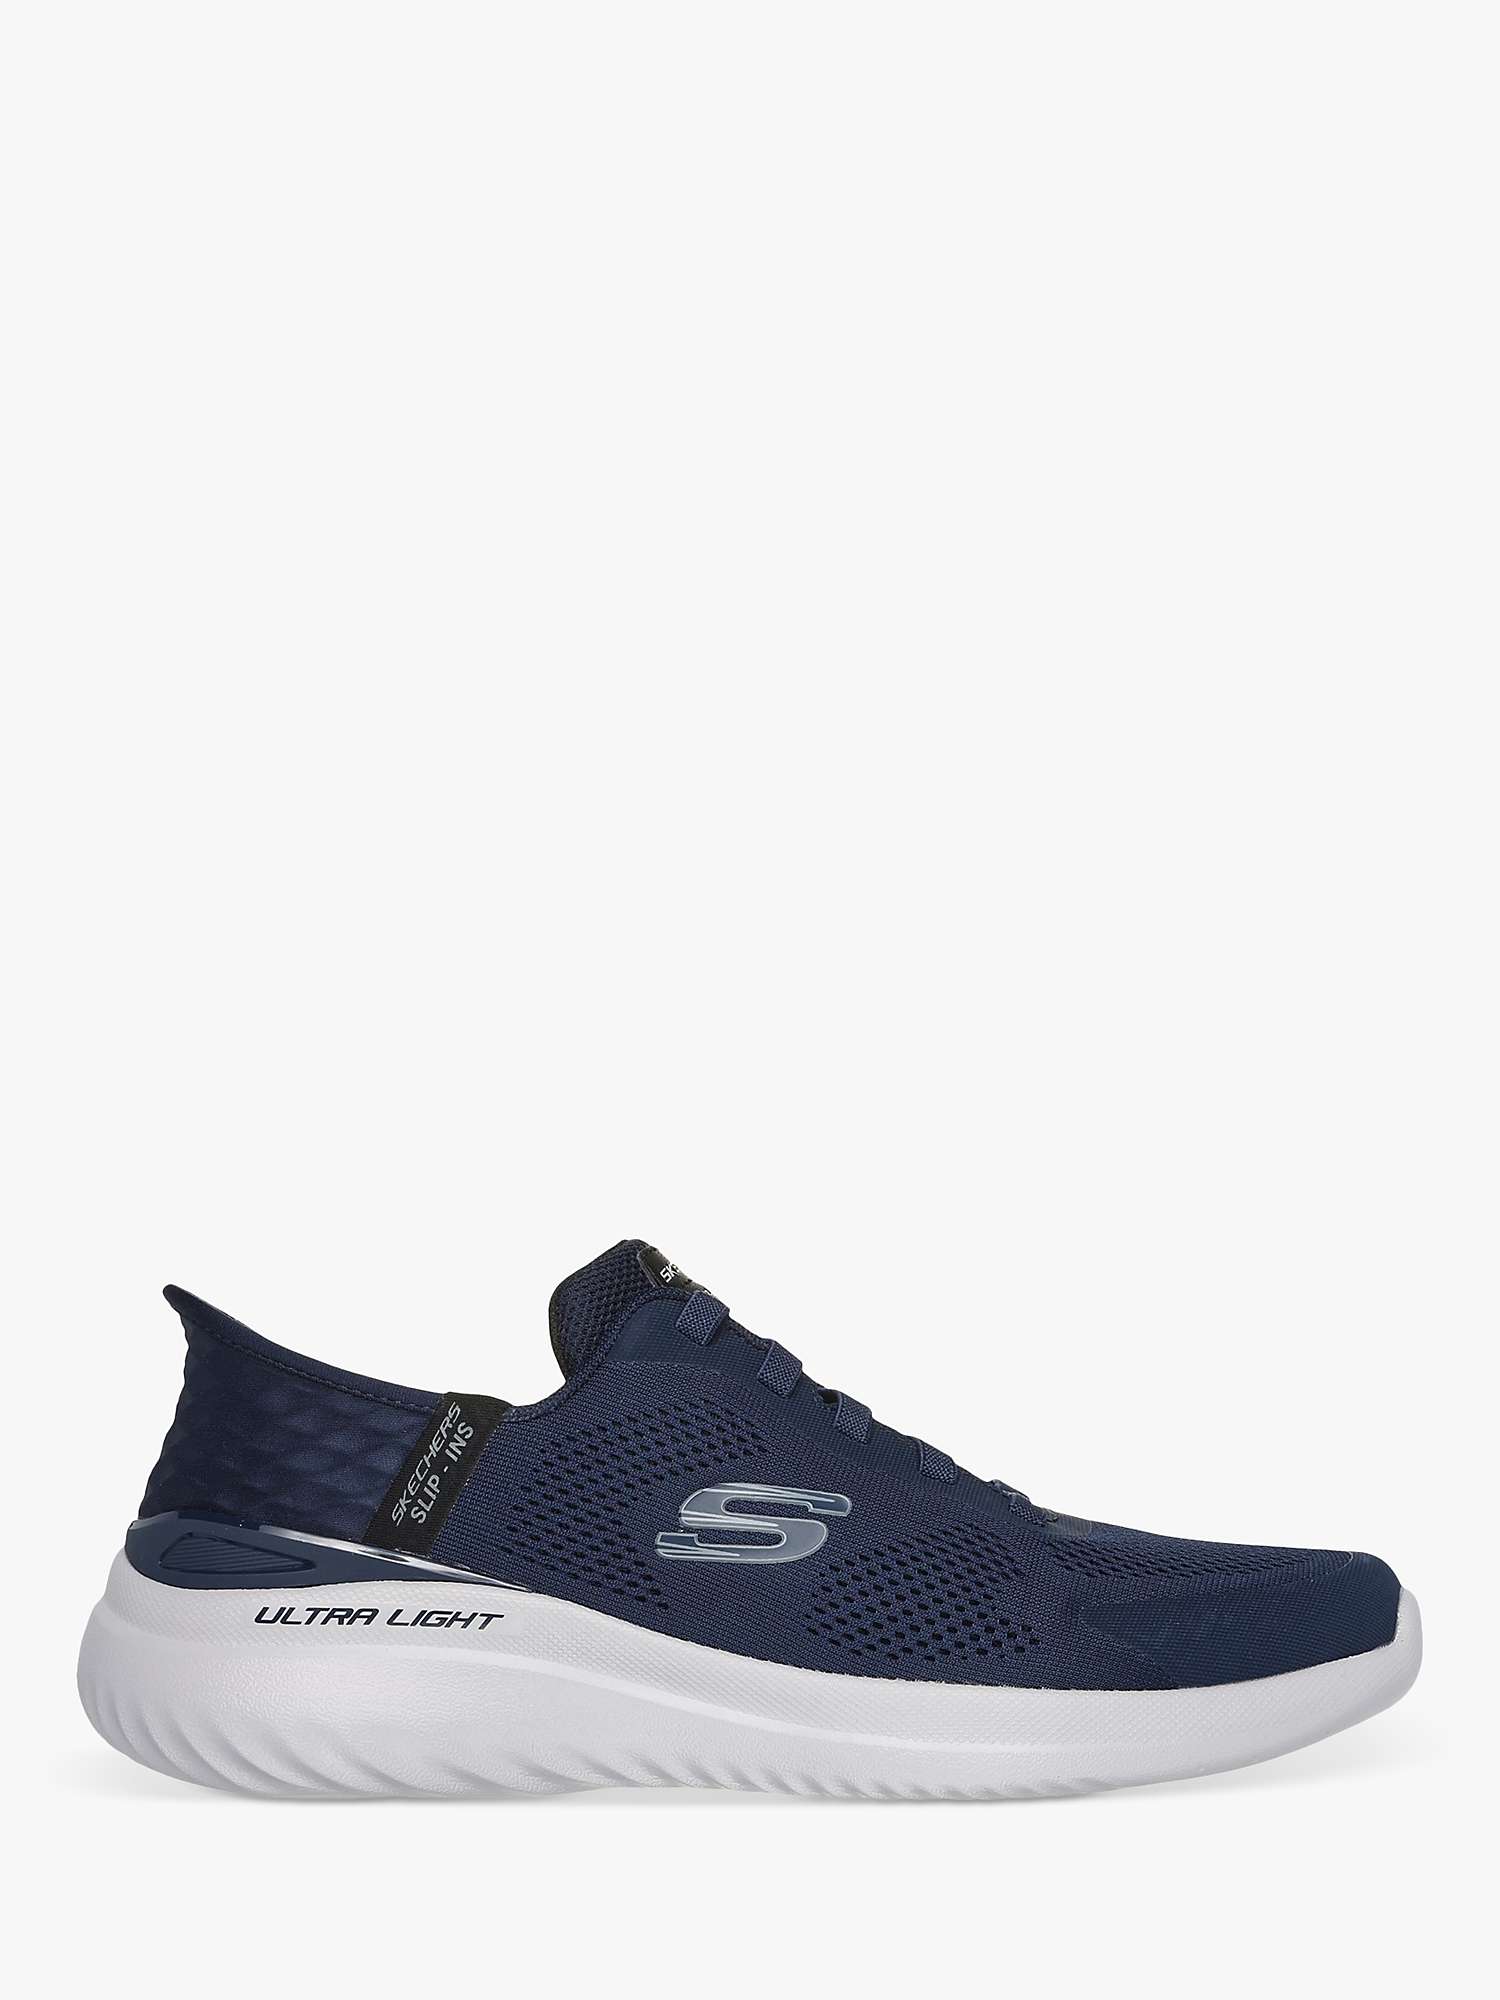 Buy Skechers Bounder 2.0 Emerged Trainers Online at johnlewis.com